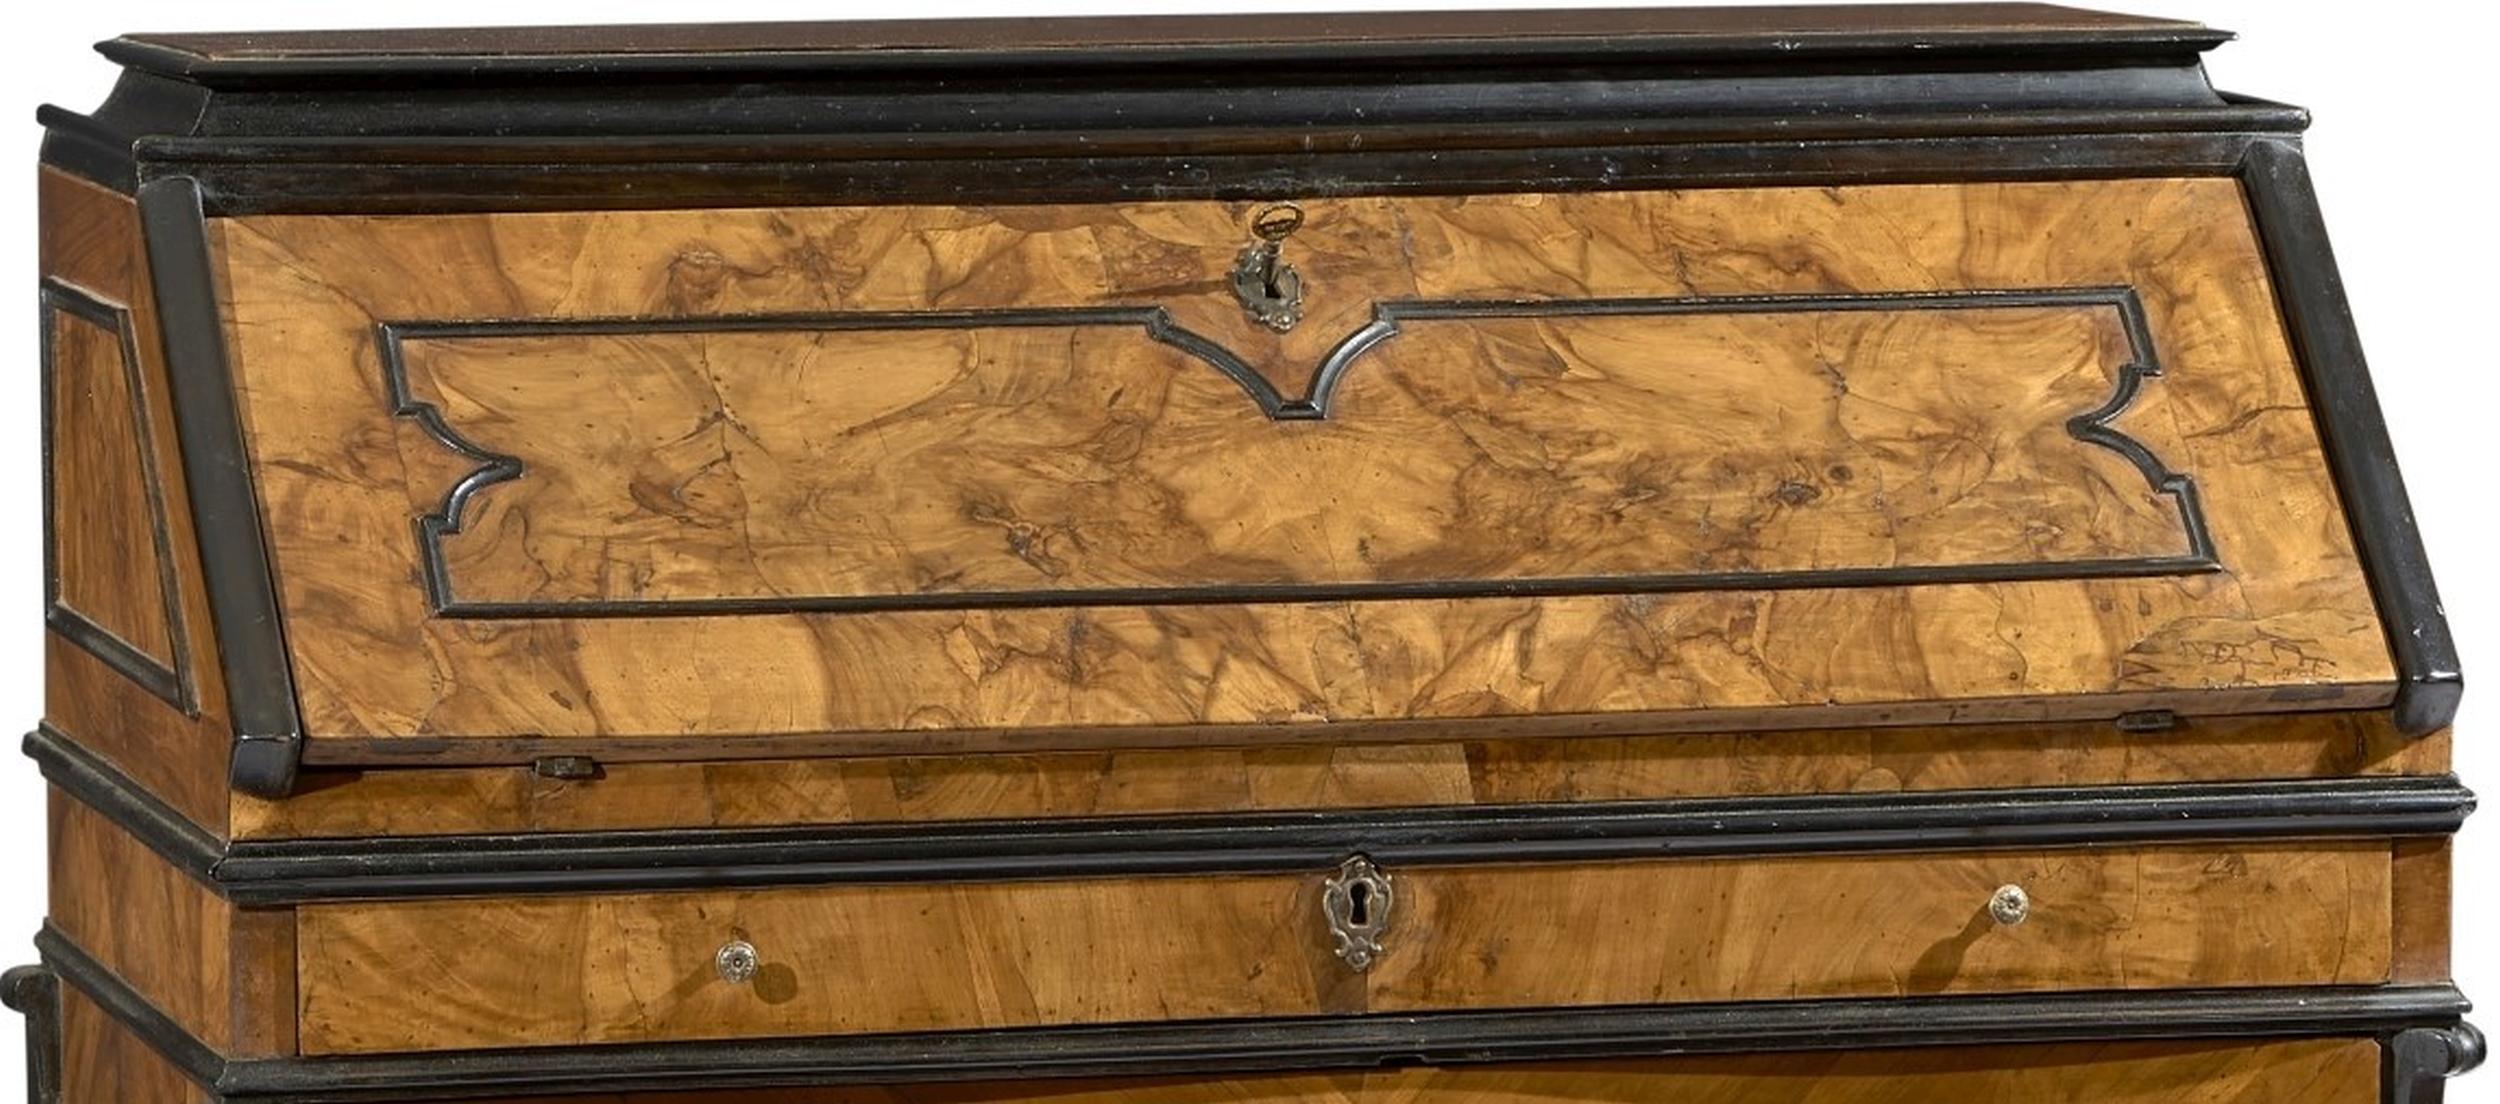 This bureau, centrally moved, Lombard from the mid-1700s, measures 110 meters x 100 width x 50 depth, is built with walnut, walnut root and ebonized frames in different shapes (different sides from the center and the top) with six drawers inside